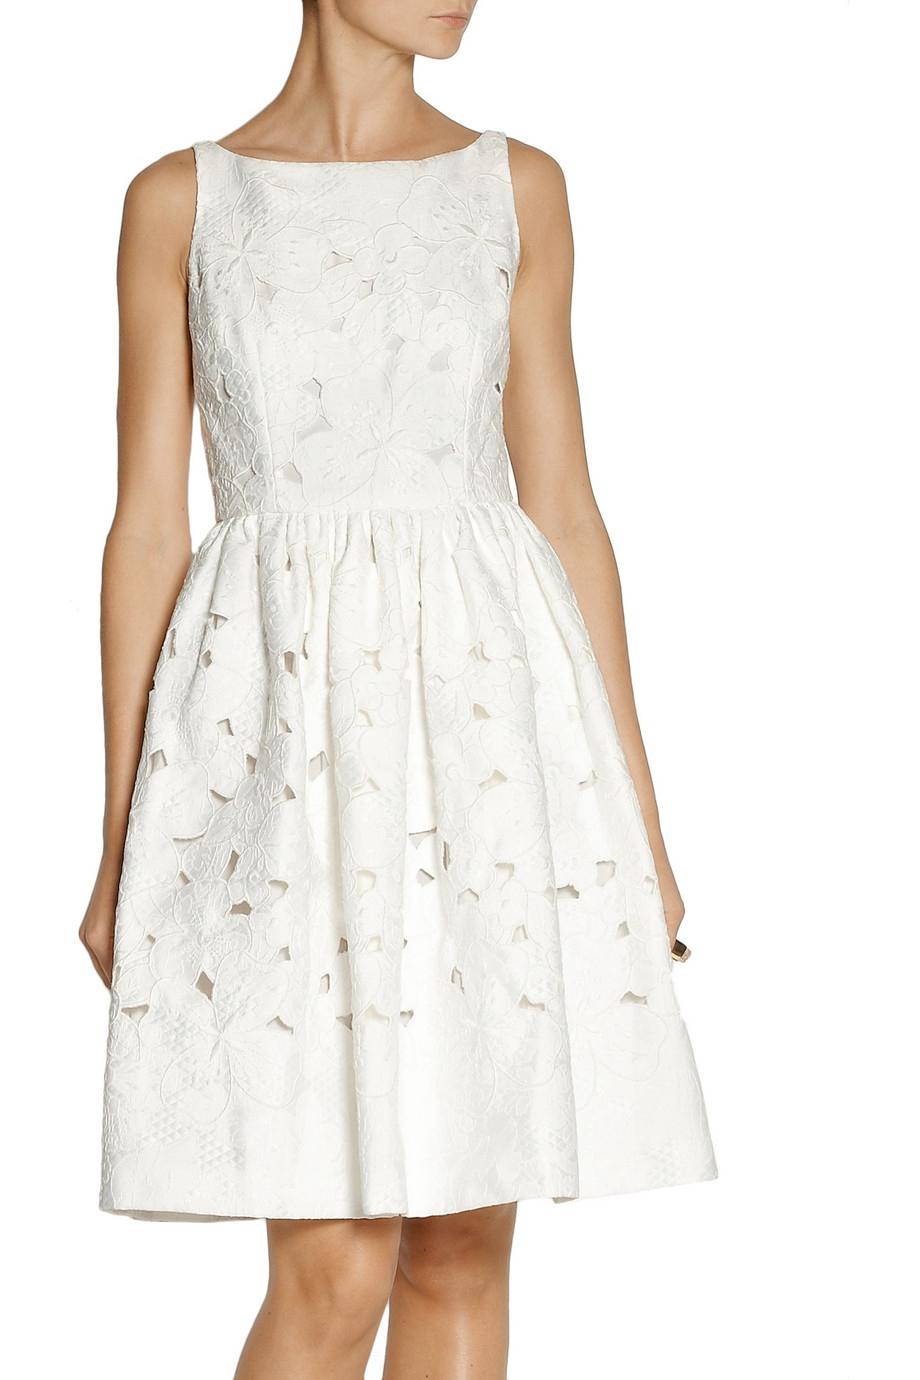 Dolce & gabbana Cut Out Floral Brocade Dress in White | Lyst